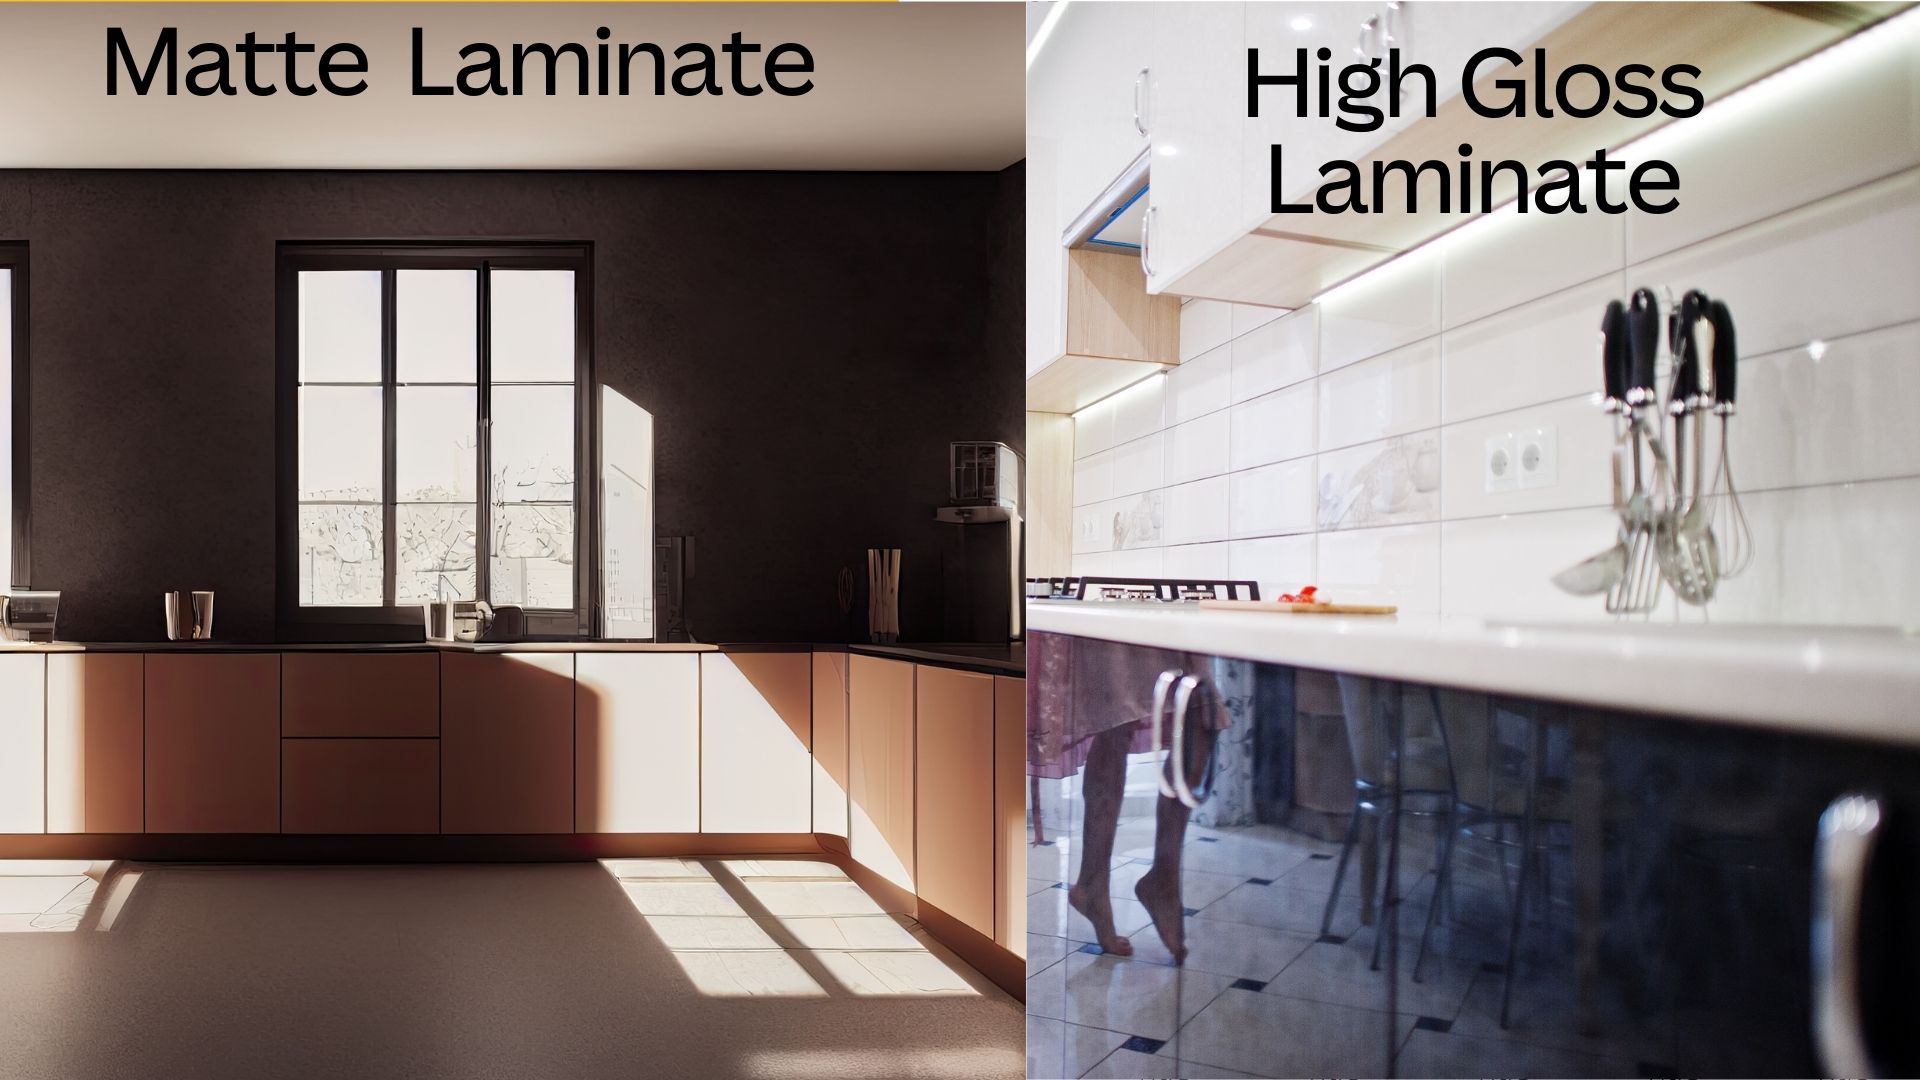 High Gloss Laminate vs Matte Laminate: Which is the Best Choice for Your Home?